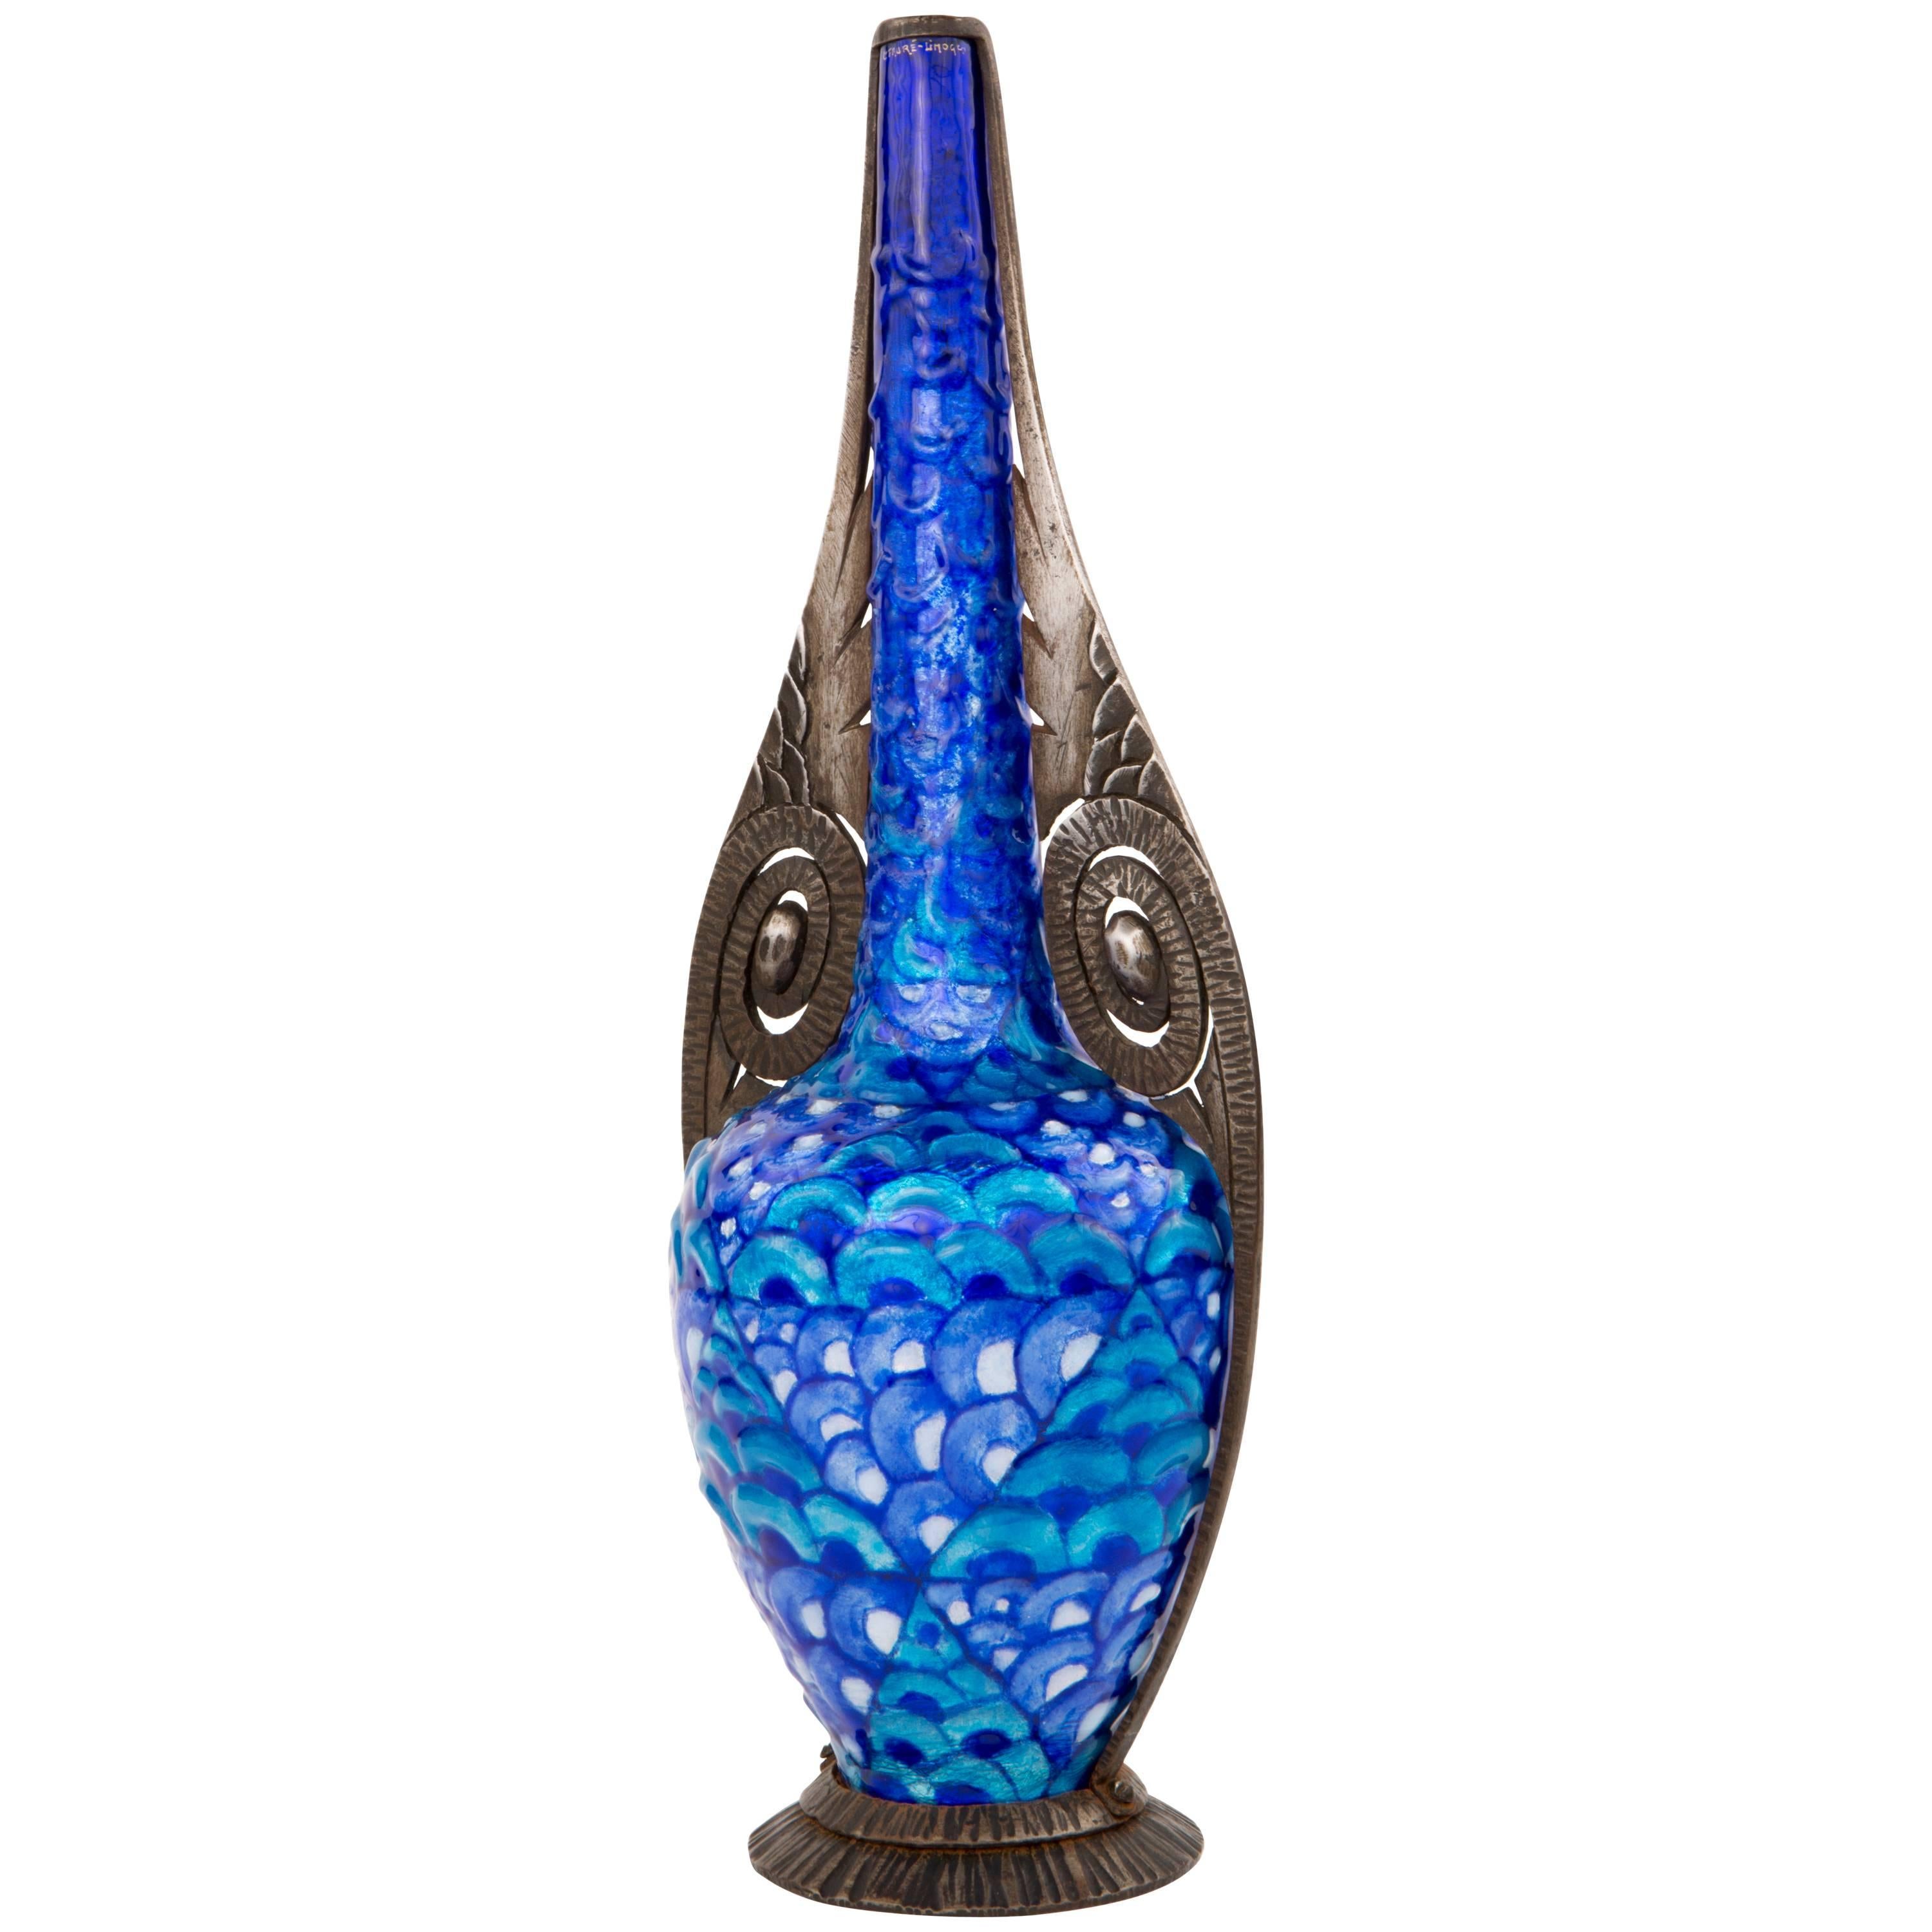 French Art Deco Enameled and Wrought Iron Decorated Vase by Camille Fauré